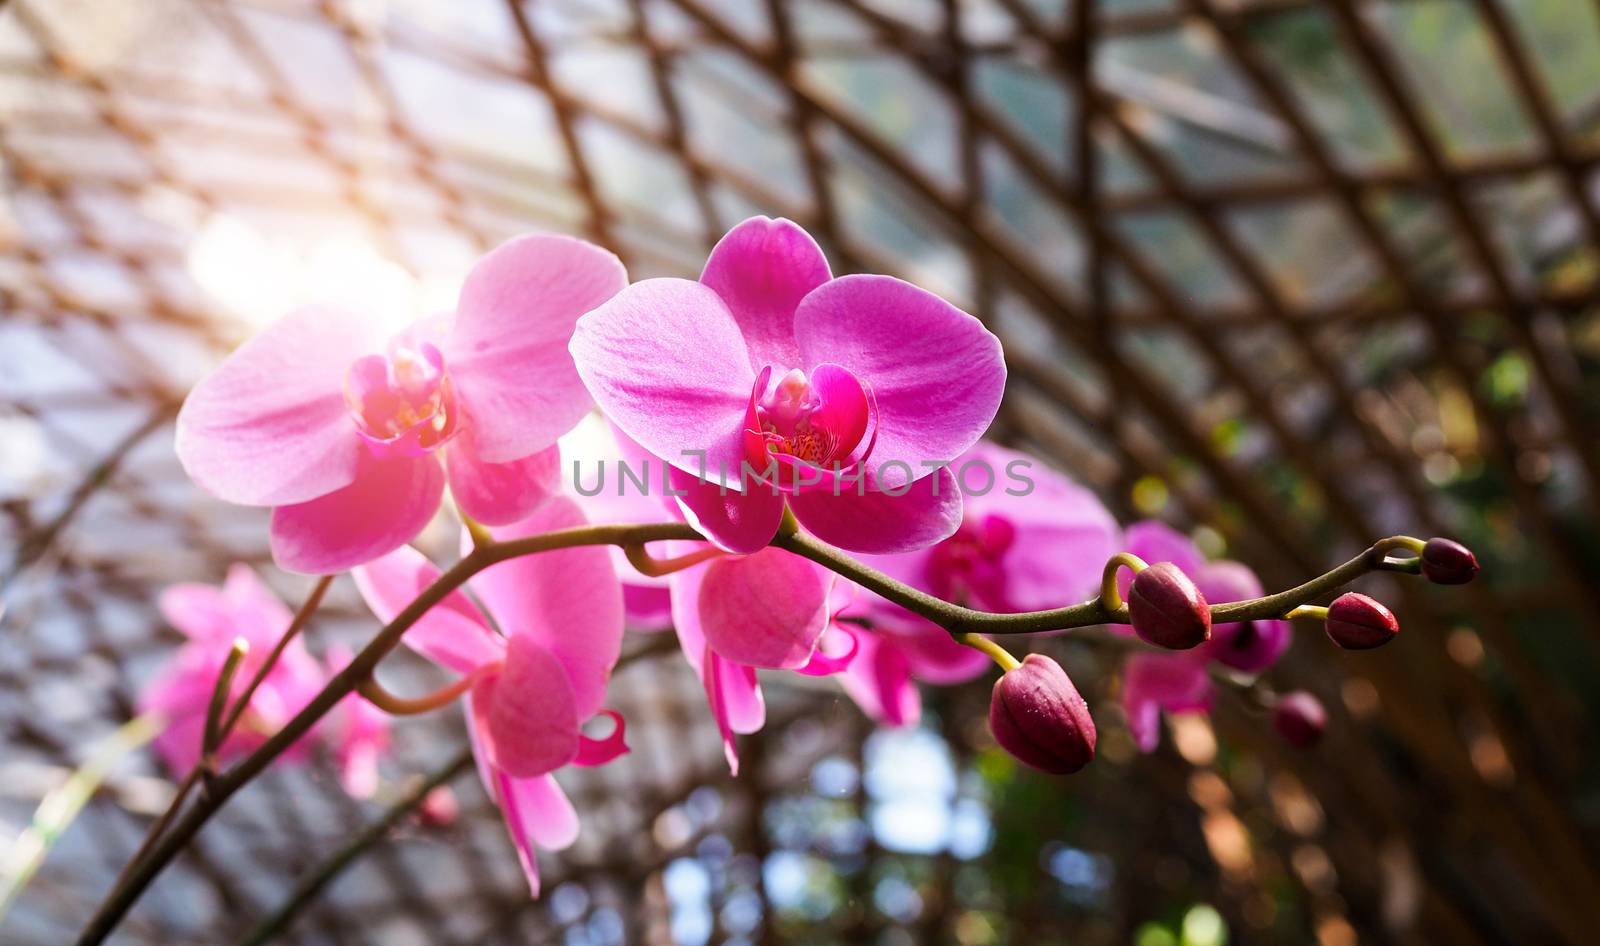 beautiful purple Phalaenopsis orchid flowers in a garden. with a roof structure made of curved bamboo is background.